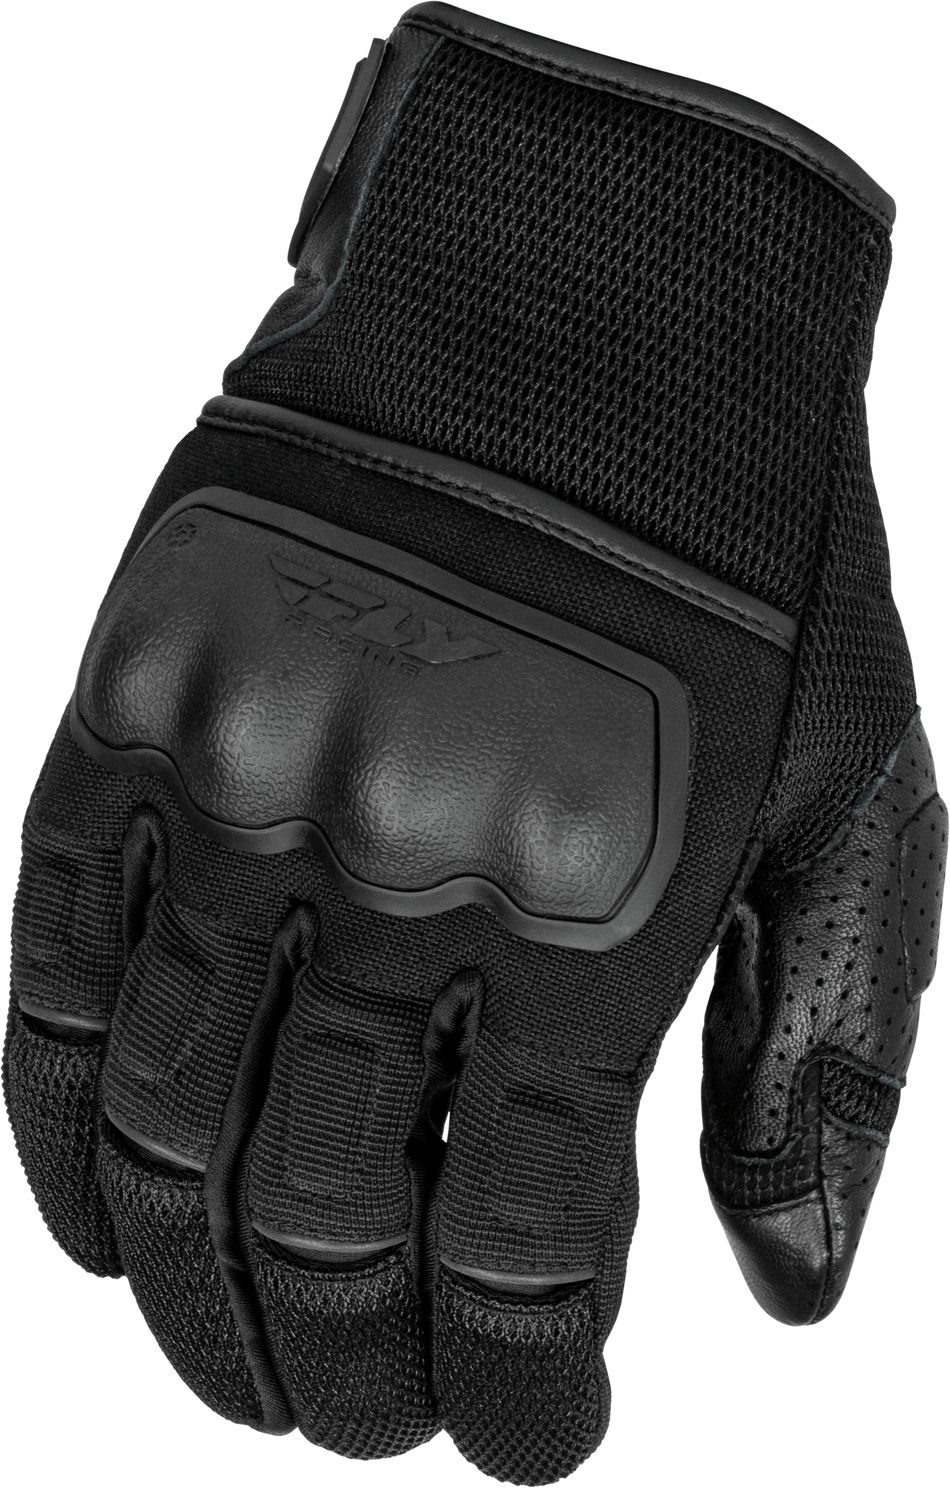 FLY RACING Coolpro Force Gloves Black Md 476-4125M